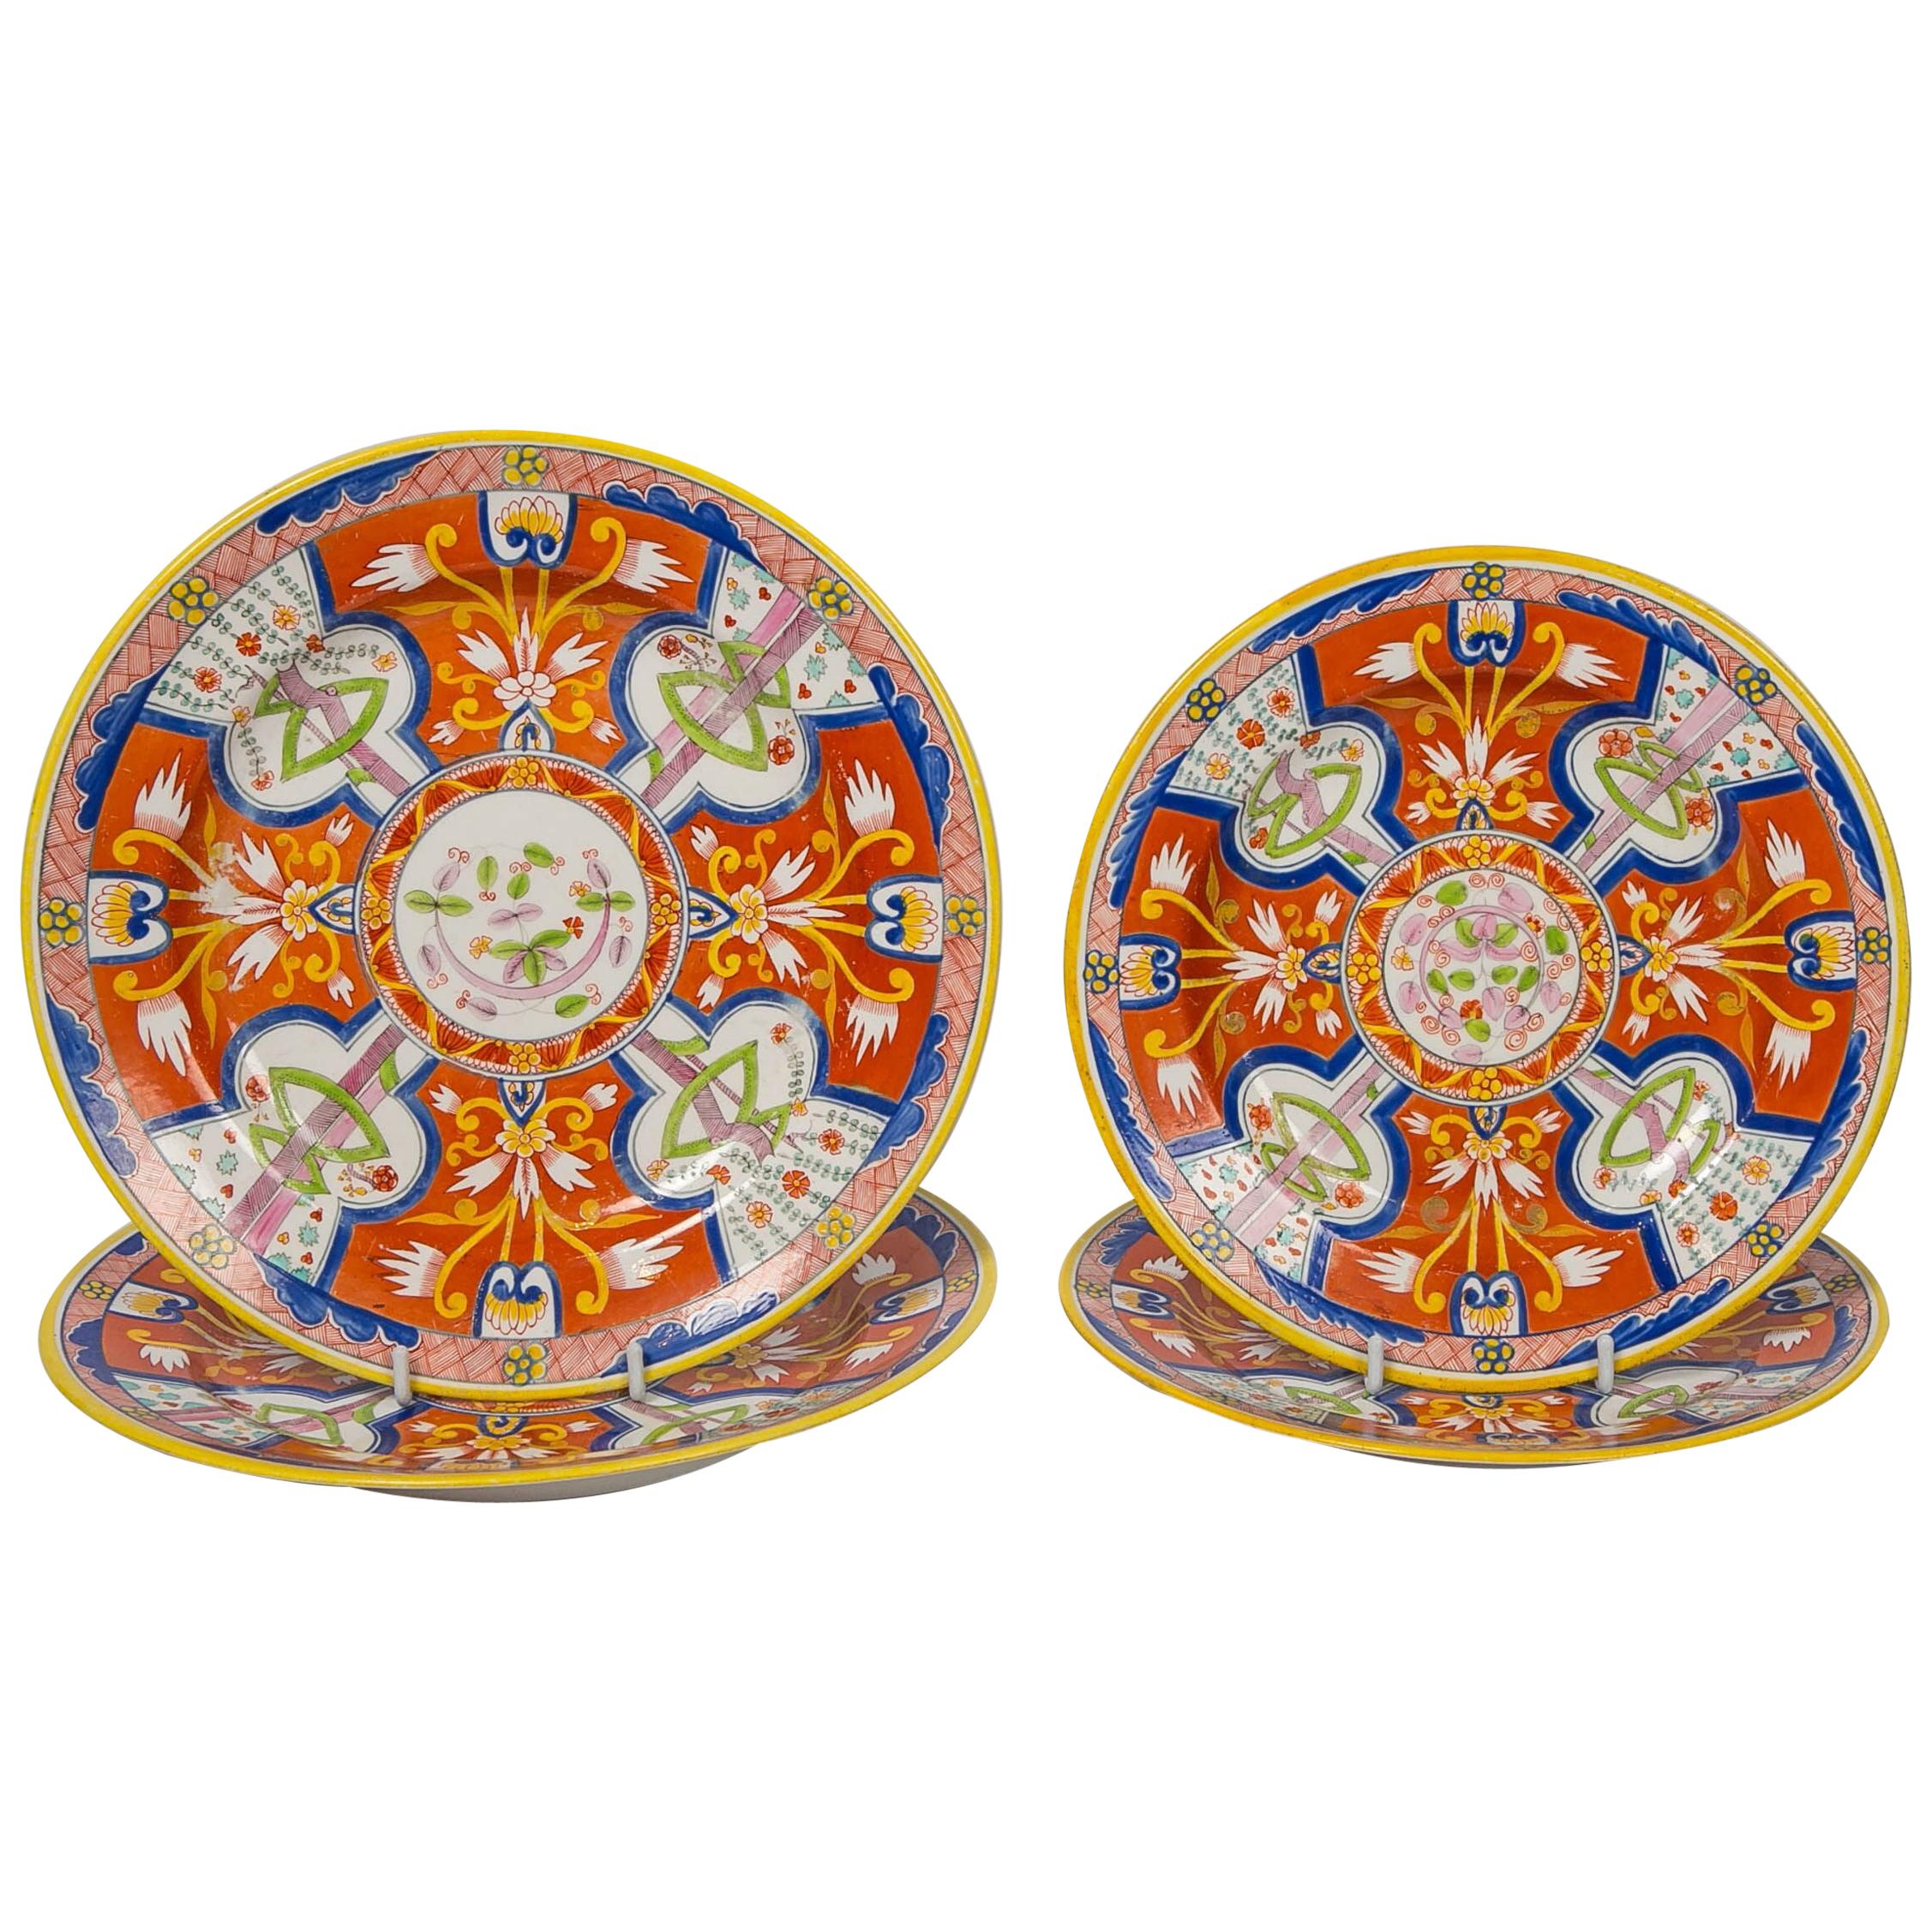 Two Pairs of Dollar Pattern Plates Spode Made in England, circa 1820